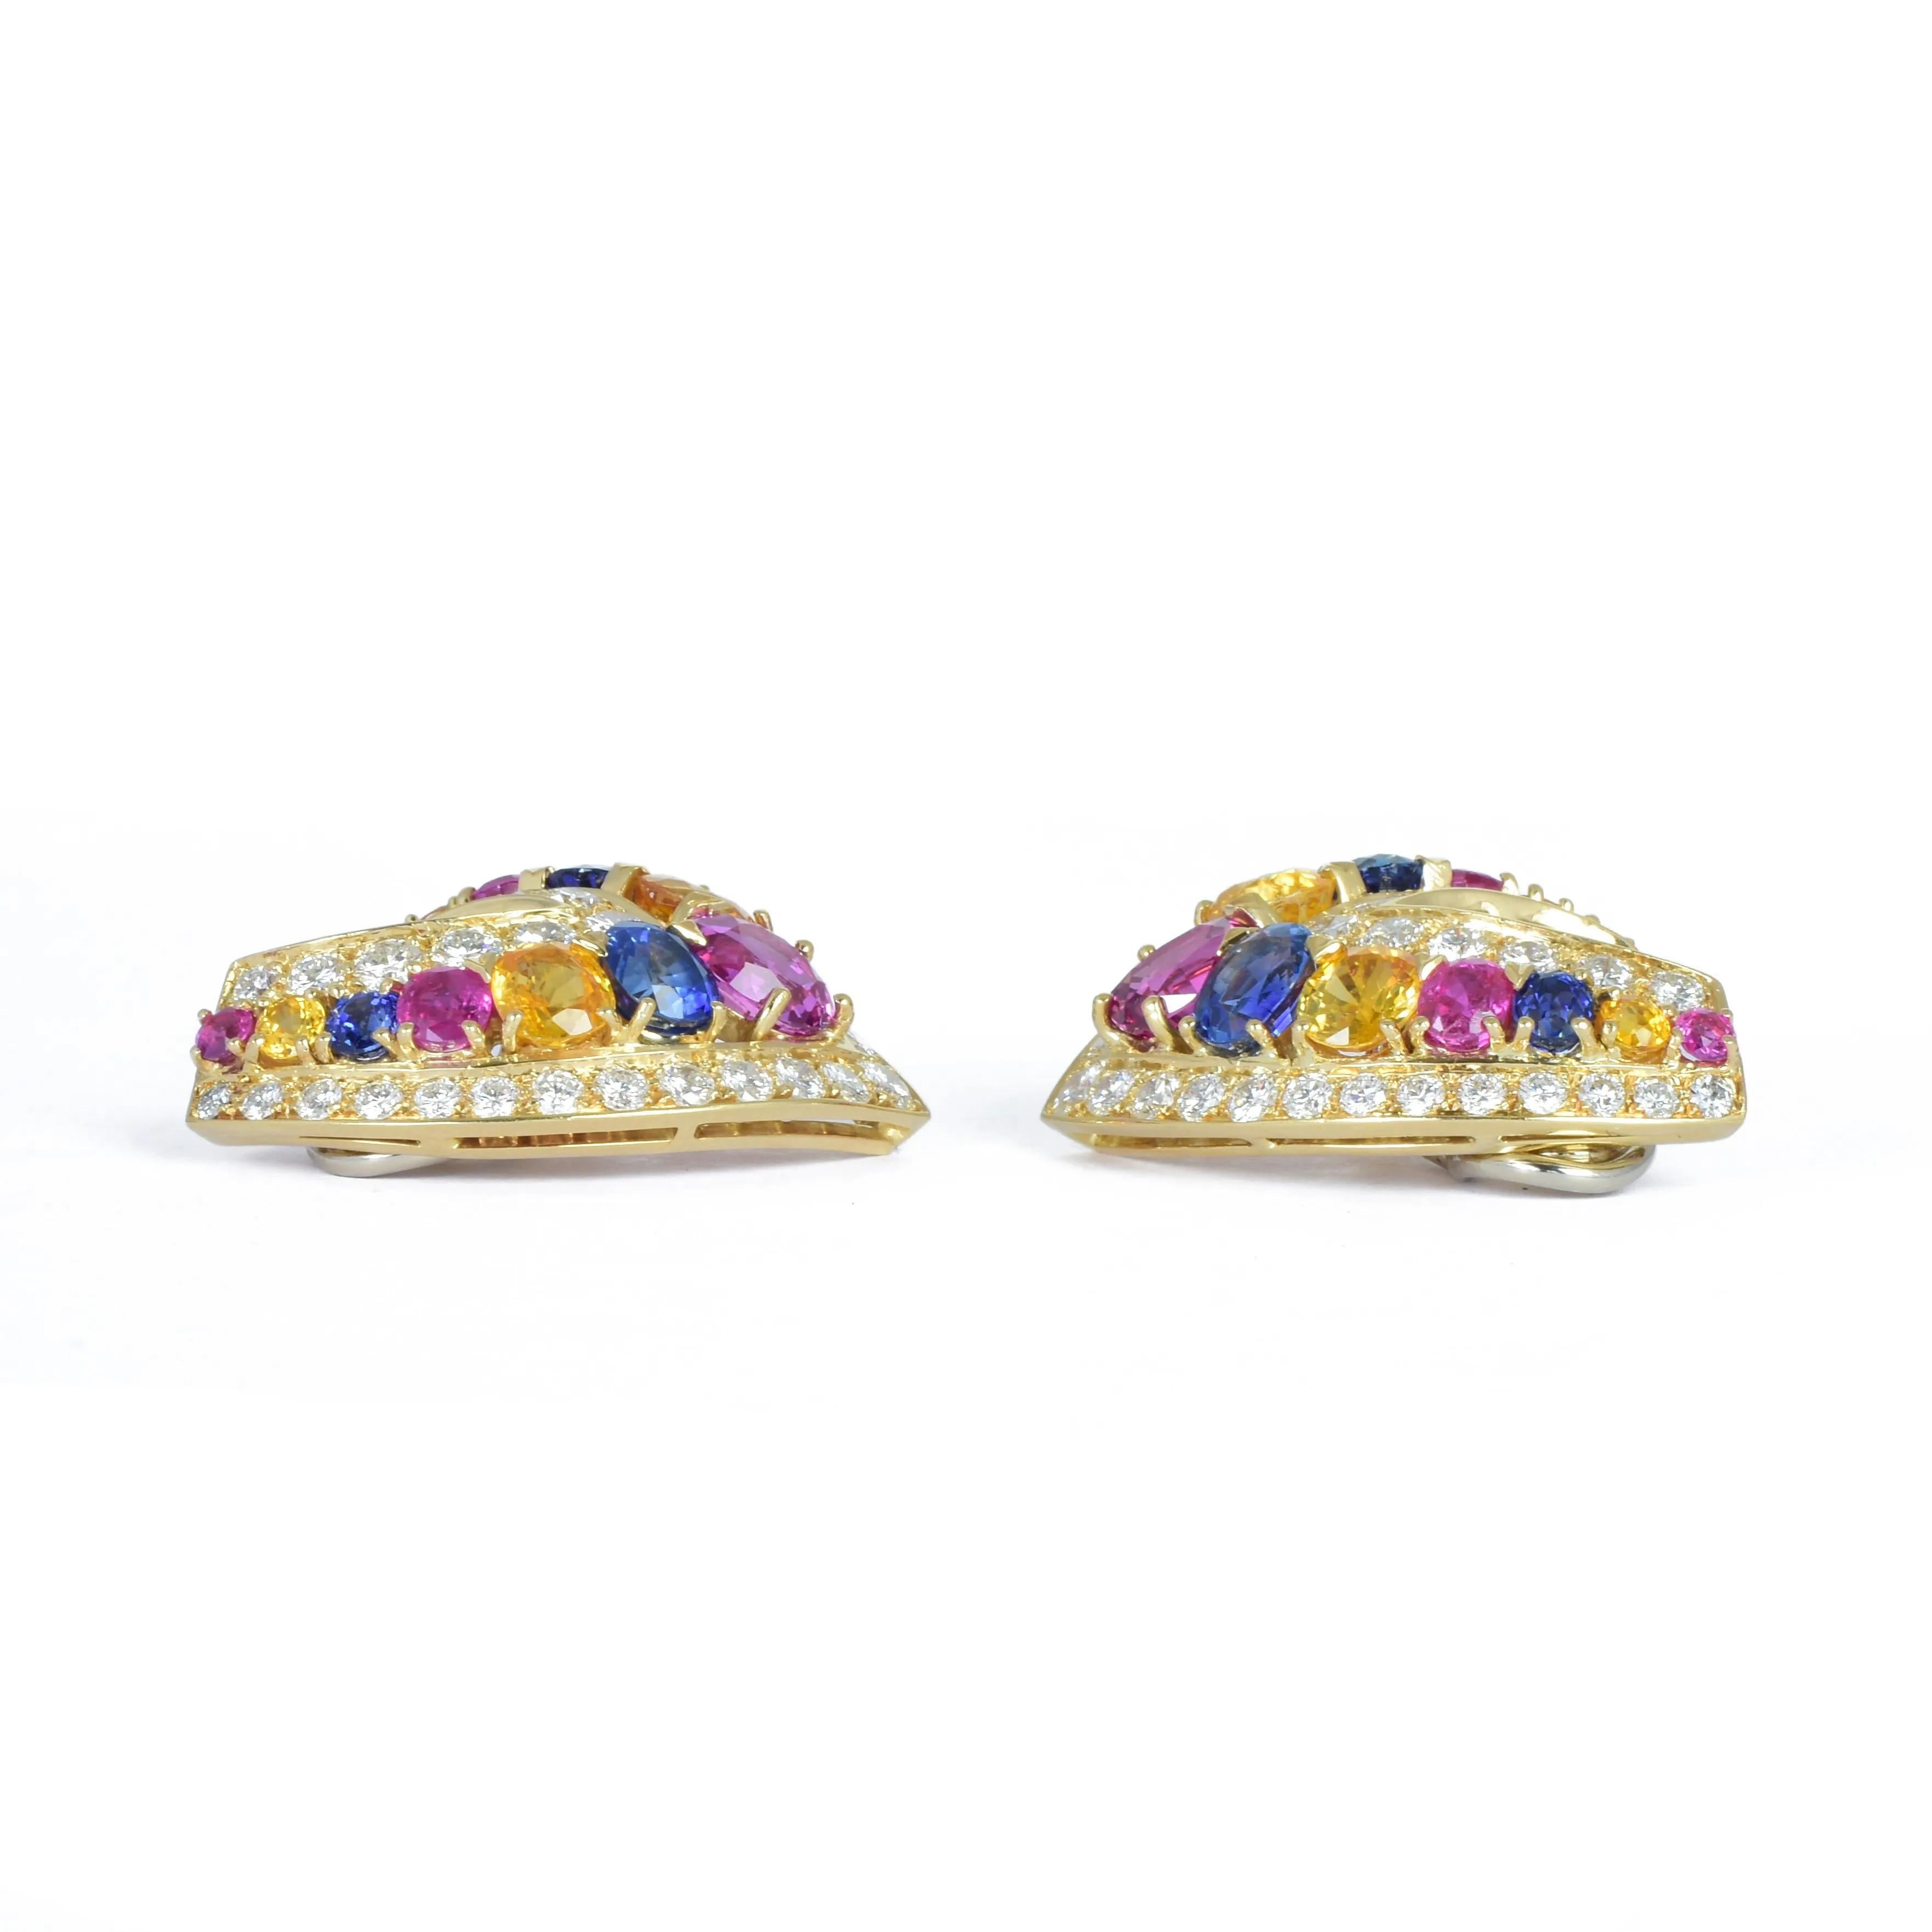 A sumptuous large pair of  gem set clip earrings.

Dating from the 1980s, Italian in origin undoubtedly

Modelled in 18k yellow gold set with pink, yellow and blue sapphires within a frame of bright white diamonds.

Superb quality throughout. bright